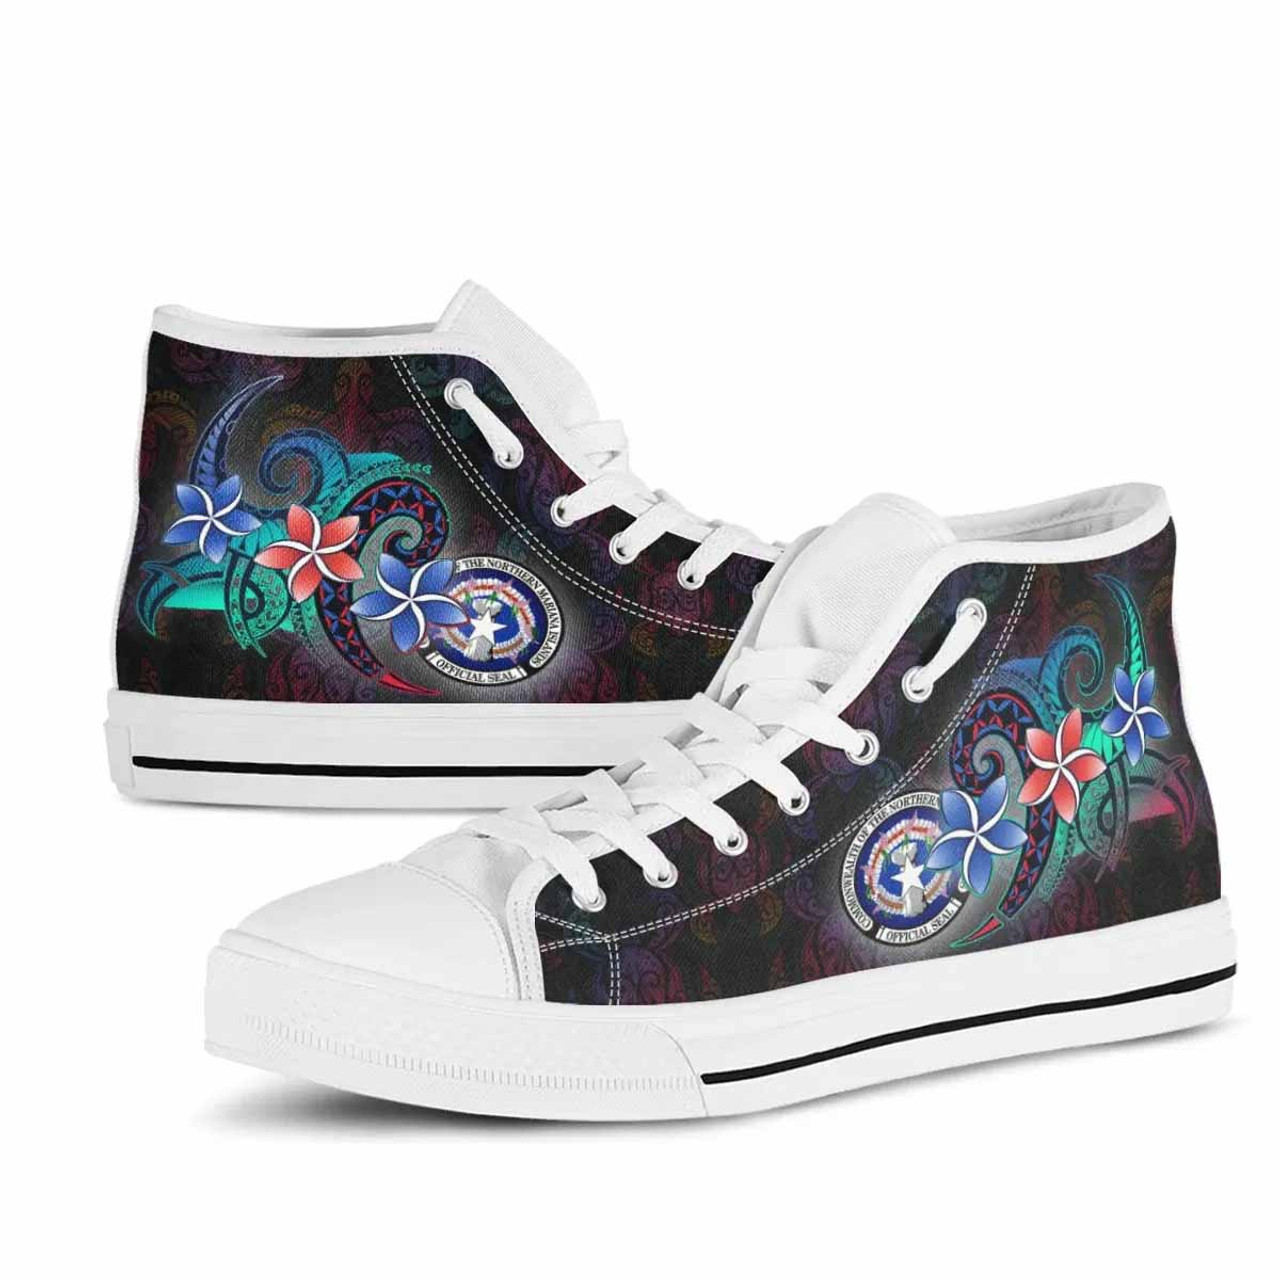 Northern Mariana Islands High Top Shoes - Plumeria Flowers Style 10